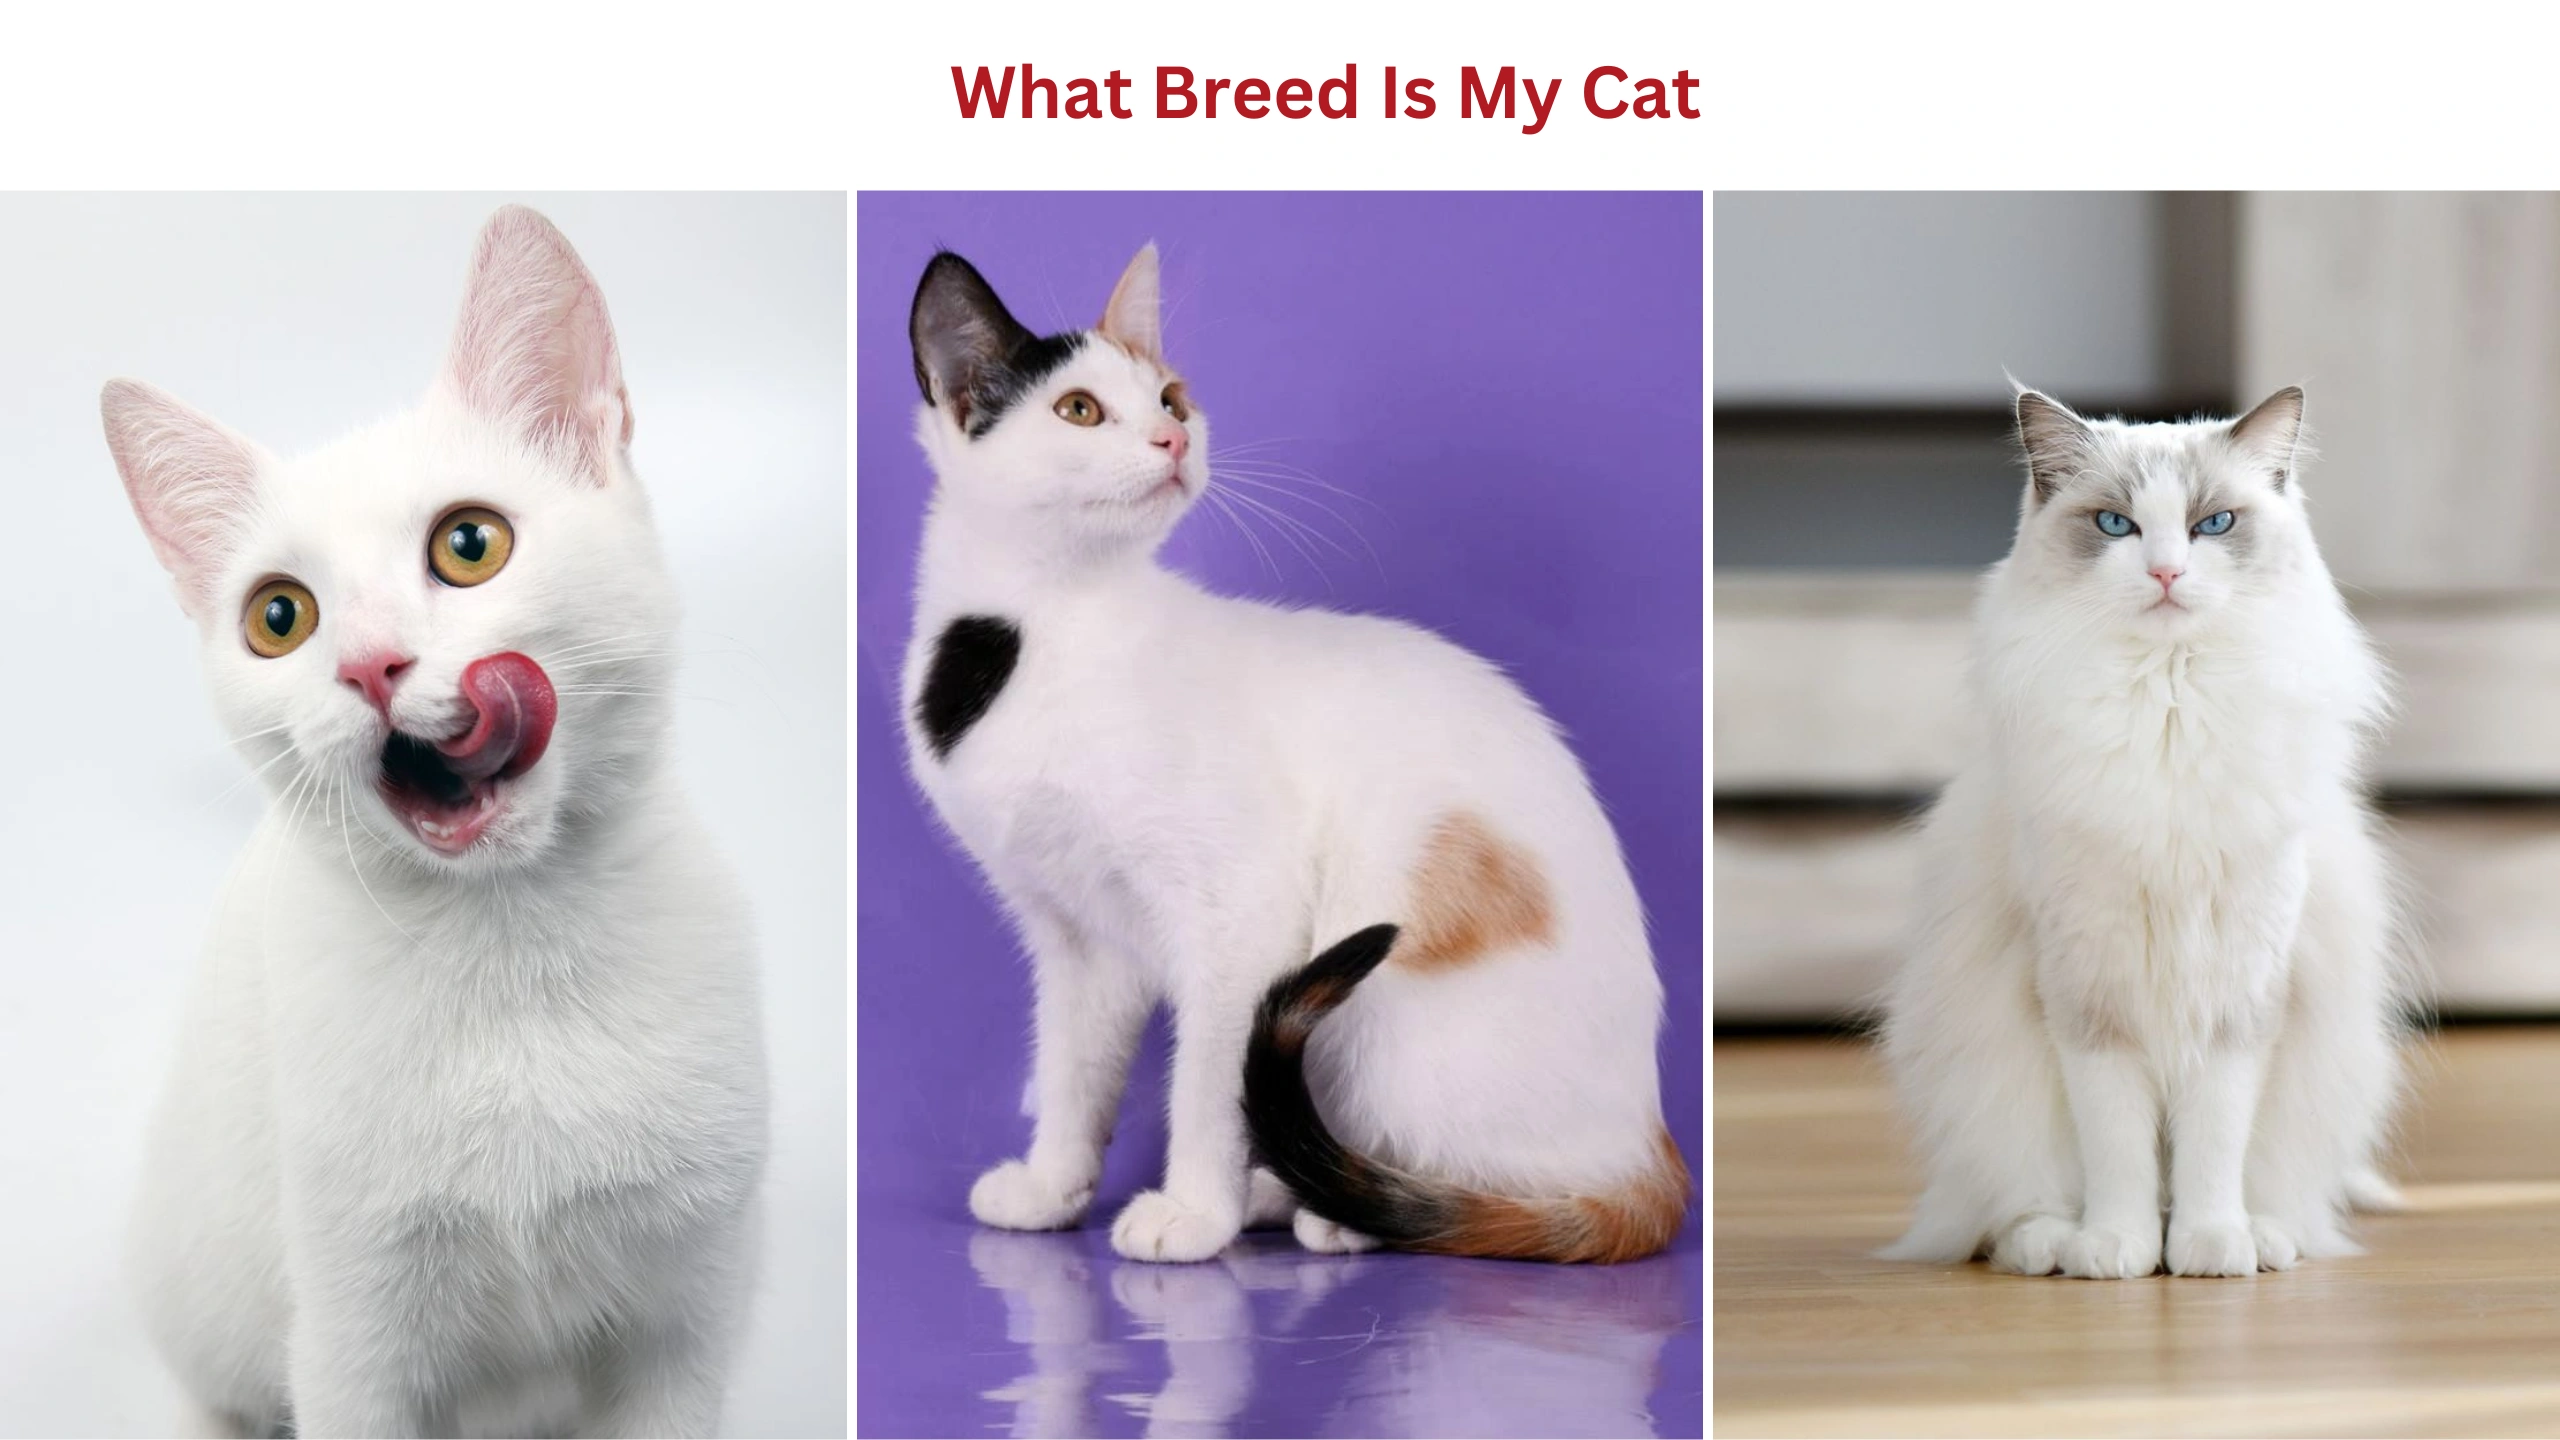 What breed is my cat